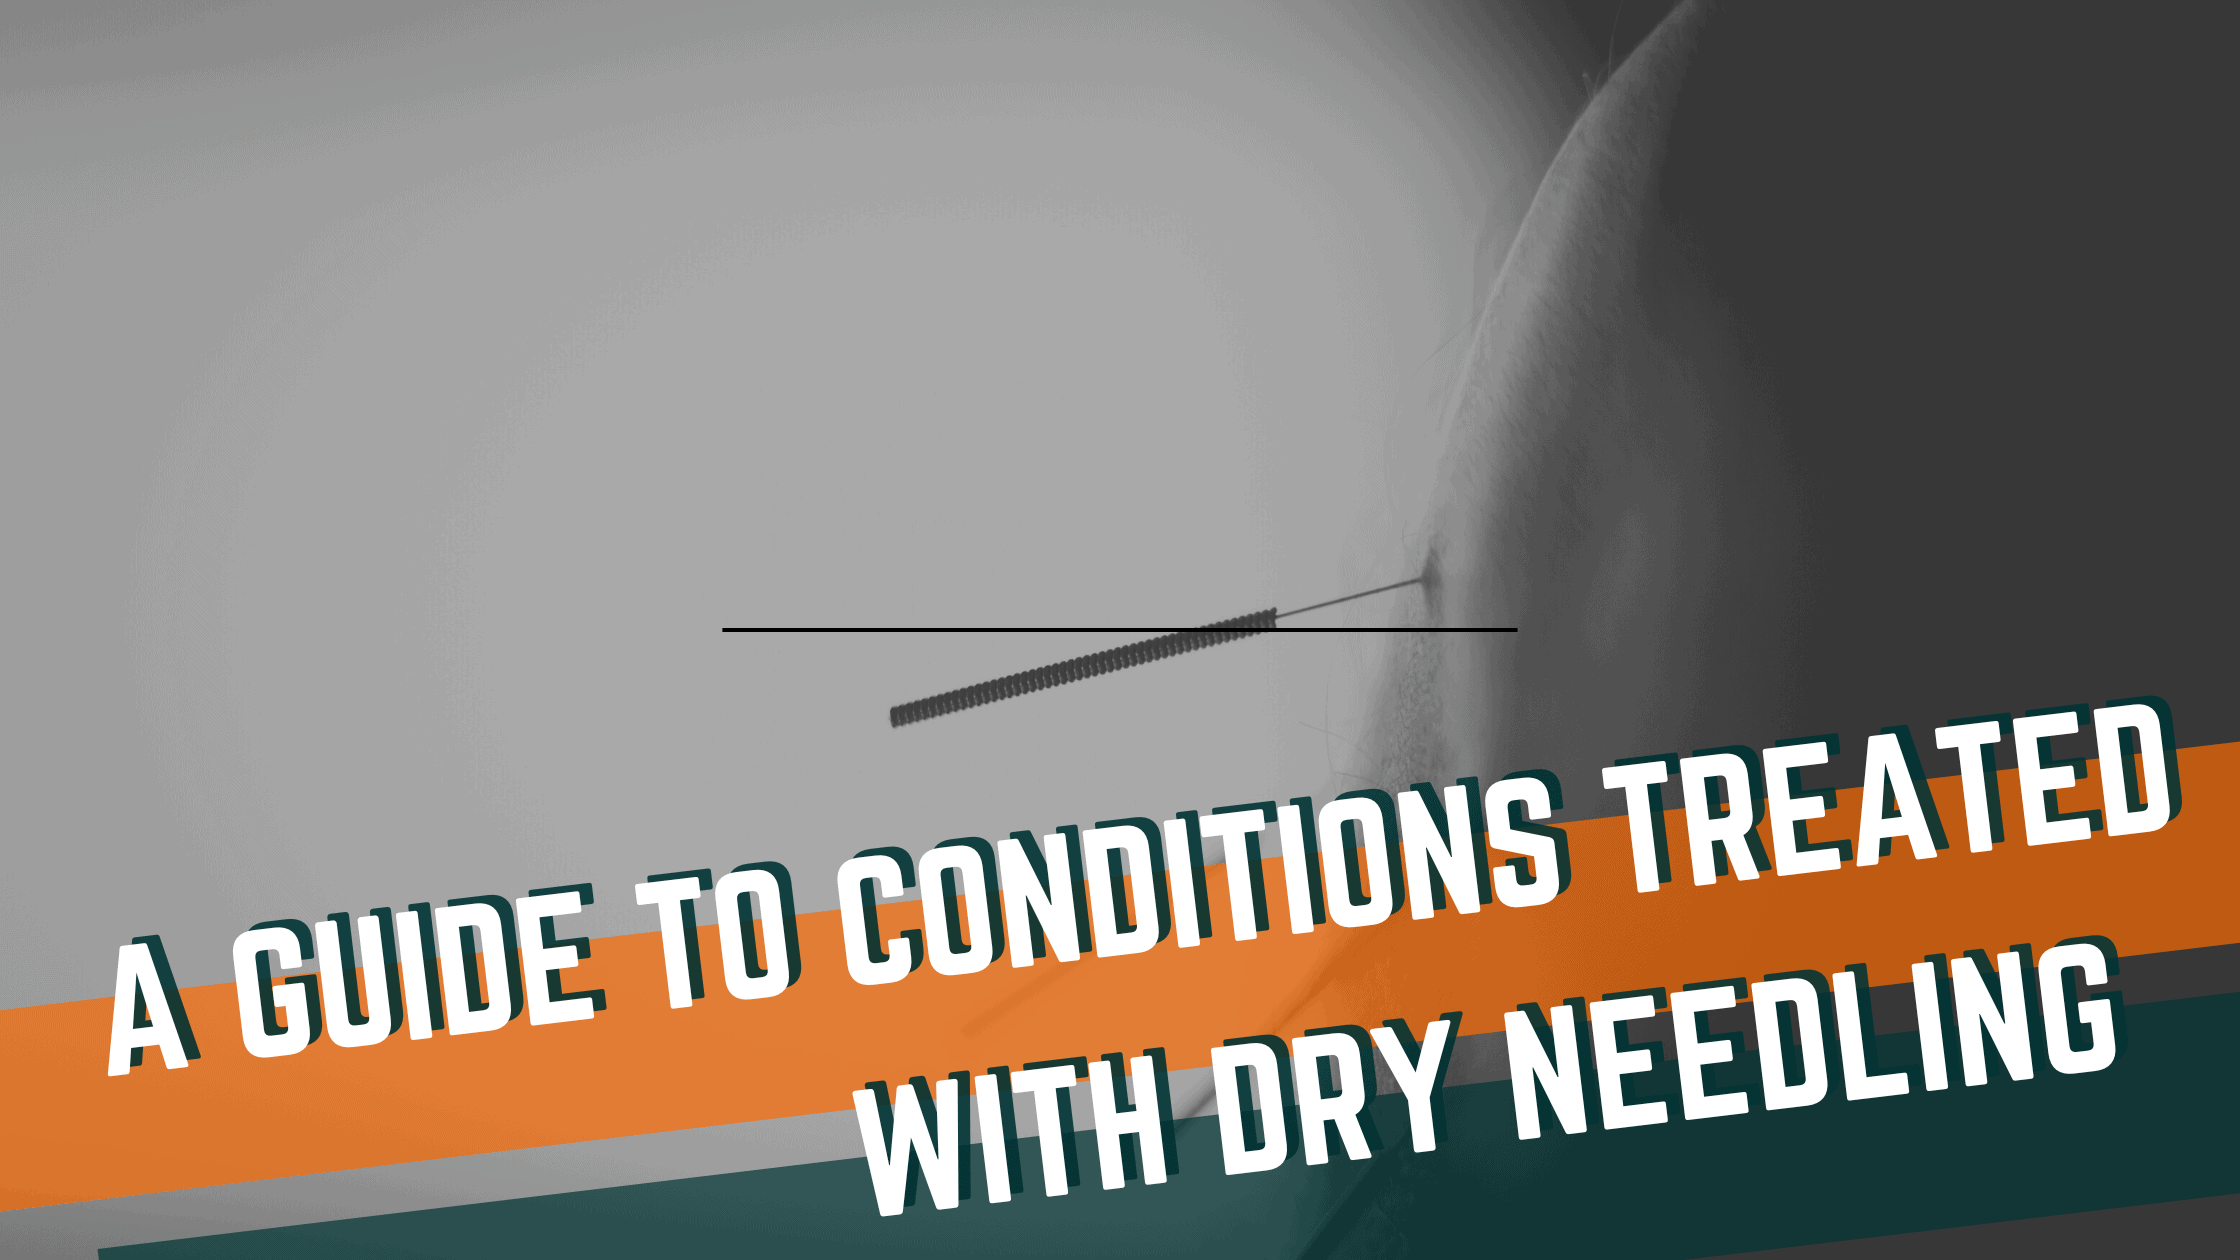 Featured image for “A Guide to Conditions Treated with Dry Needling”